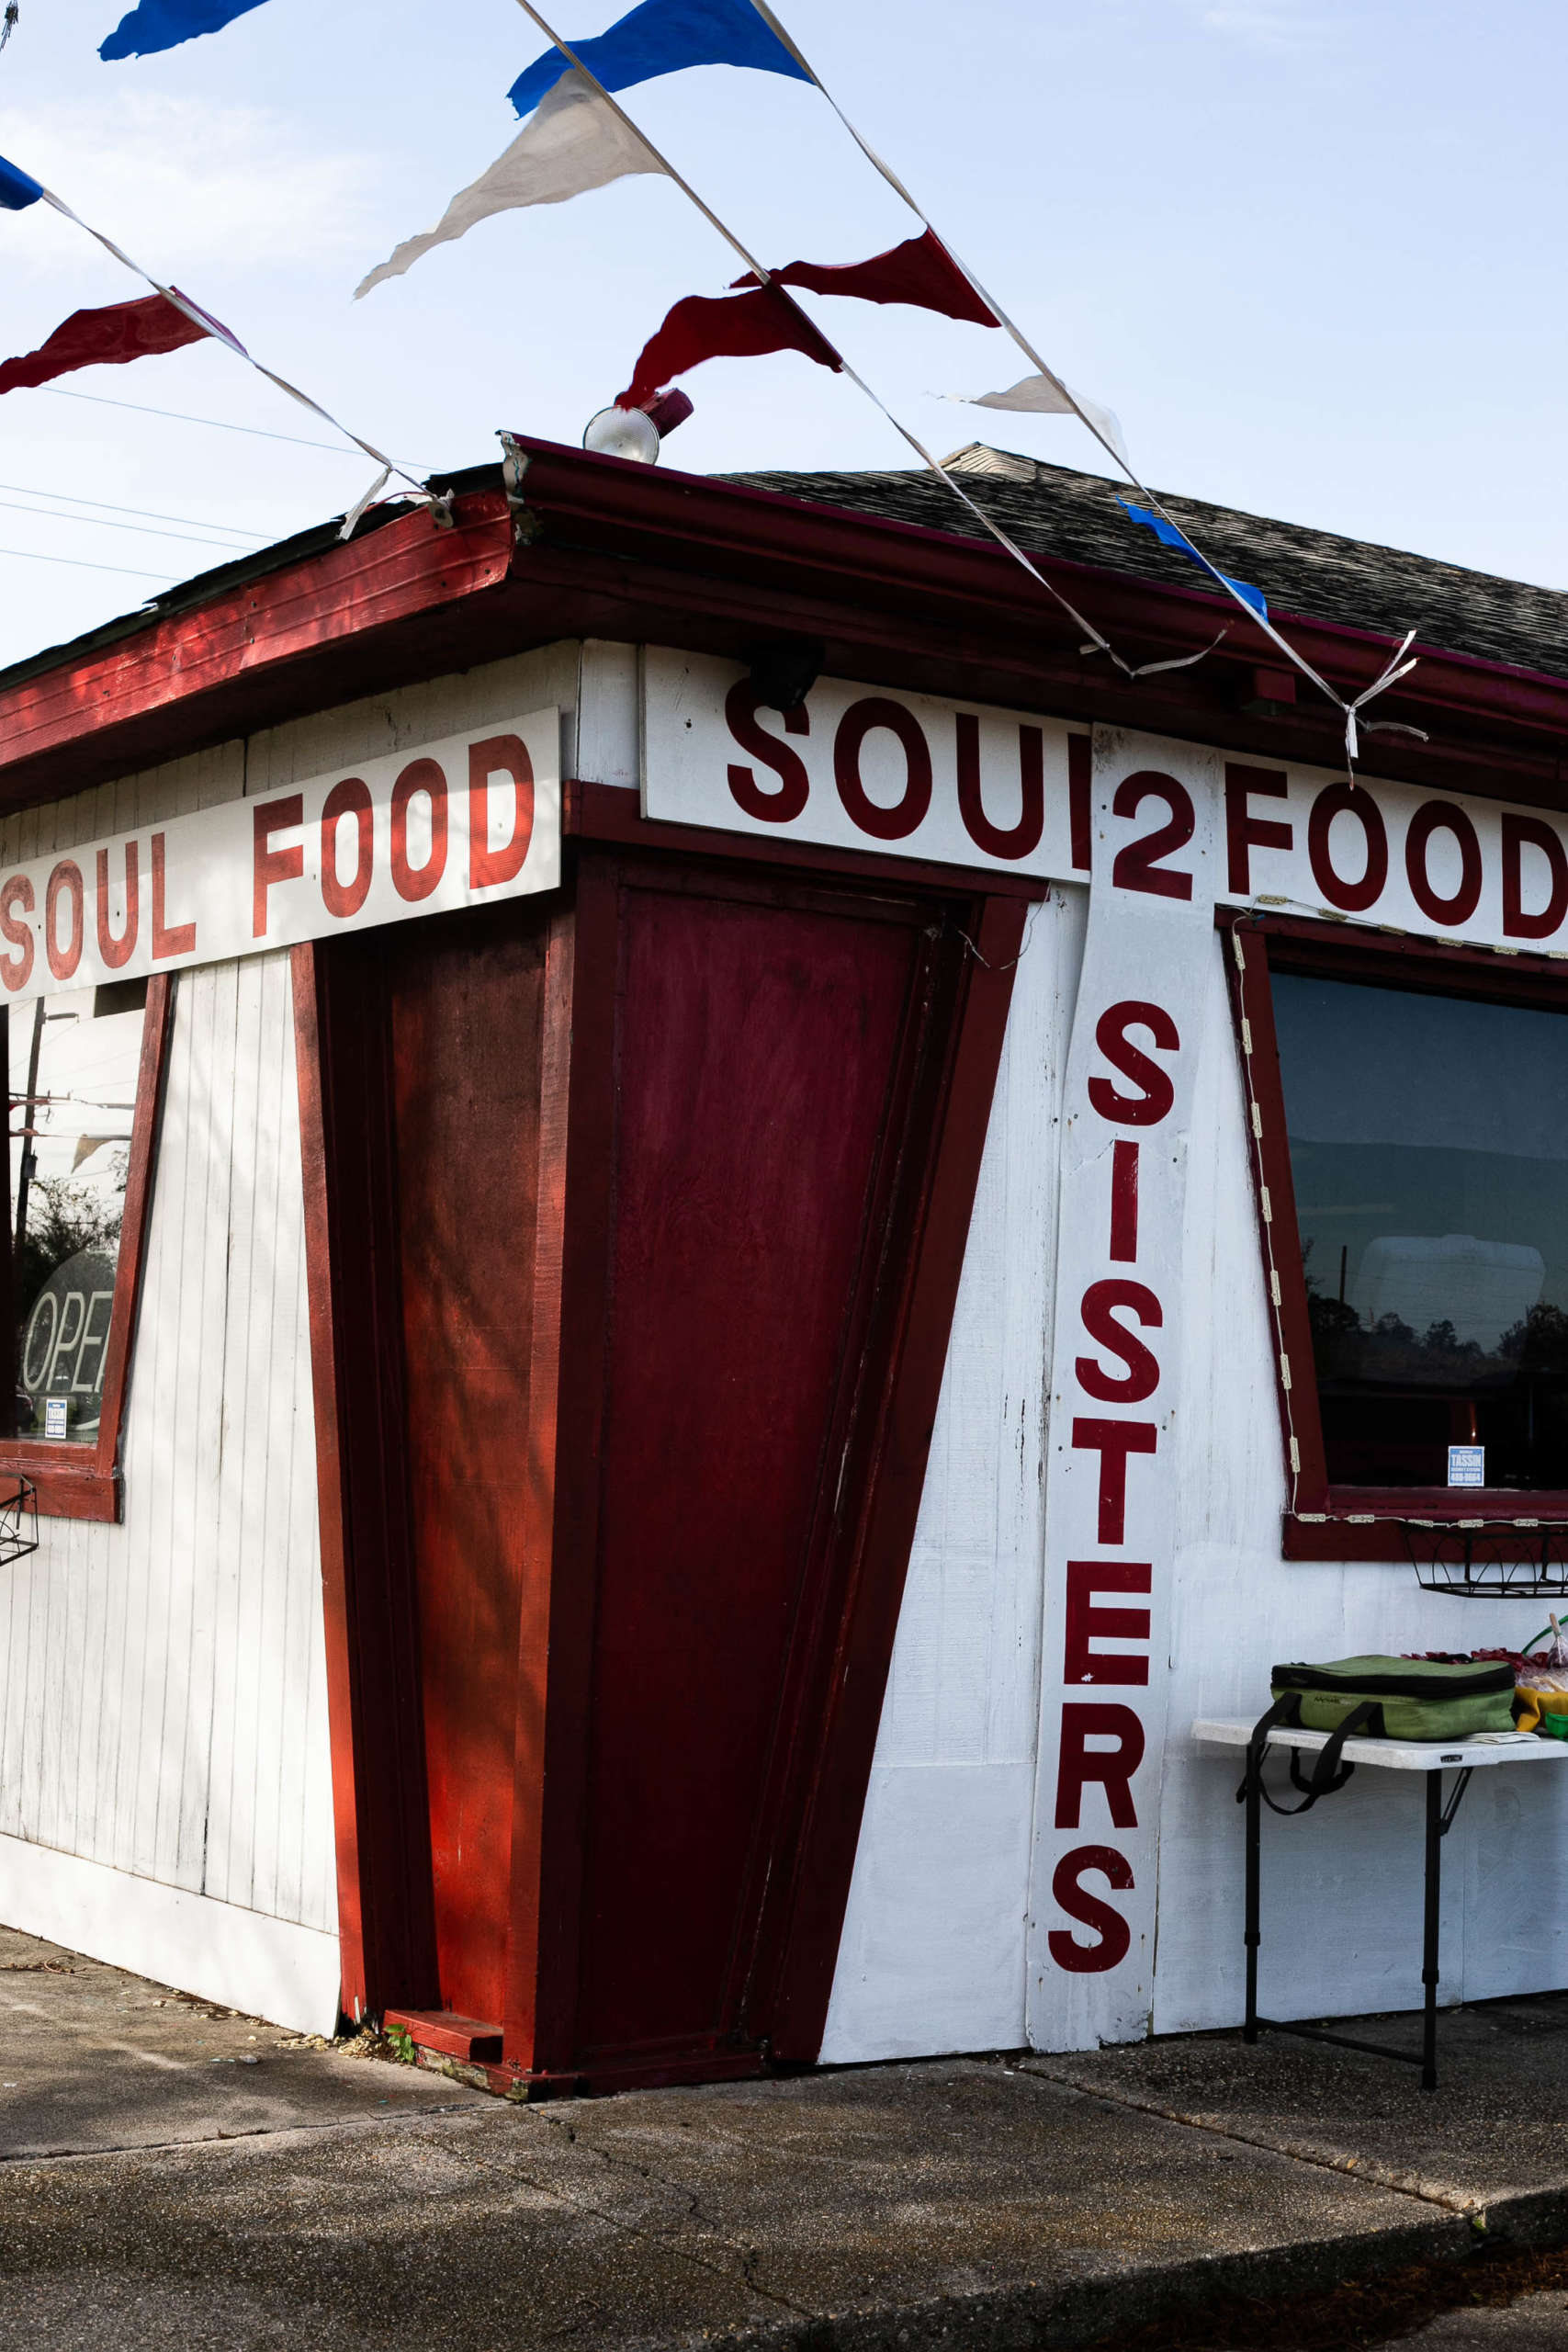 The corner of a red and white wooden building exterior. Intersecting panels along the roof and side read "2 Sisters Soul Food". Red, white, and blue triangular flags fly from streamers attached to the roof. A white plastic folding table sits in front of one window, with a green bag on top of it. The other window frames an unlit "Open" sign.